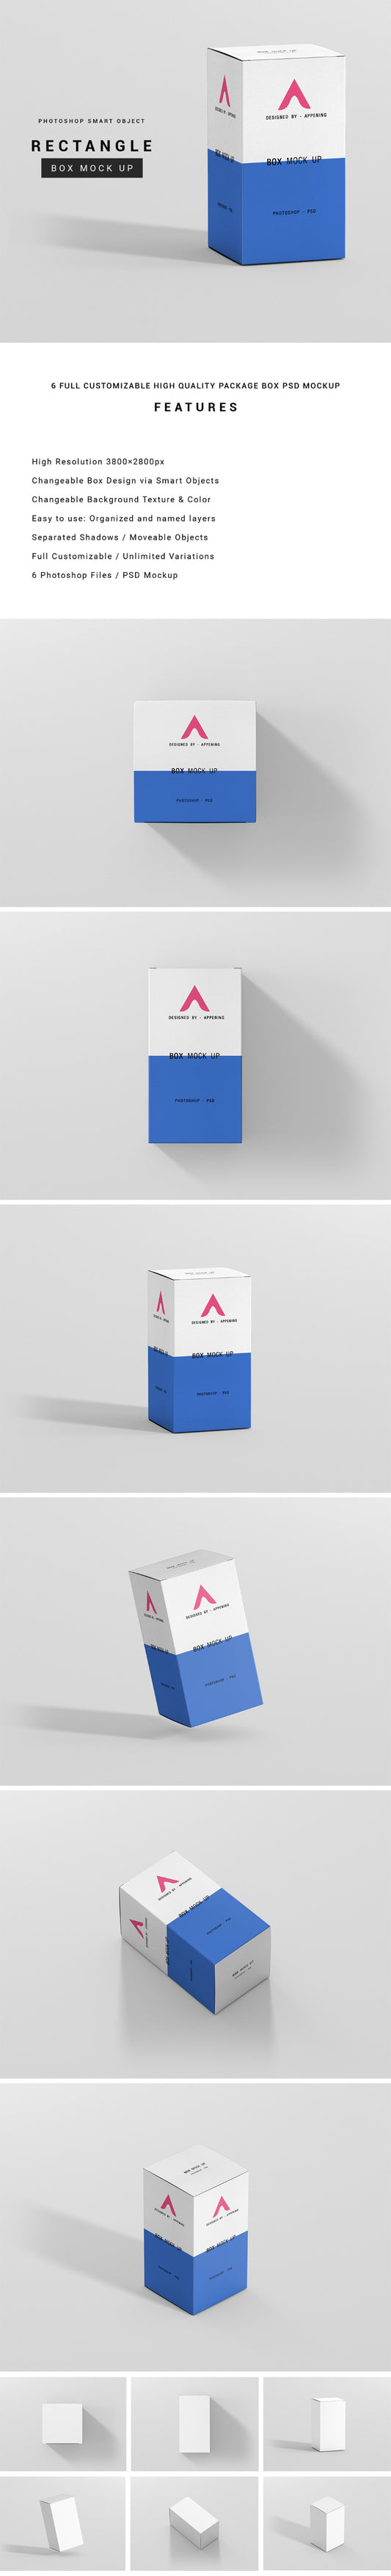 Free Huge Set of Clean Rectangle Packaging Boxes PSD Mockup